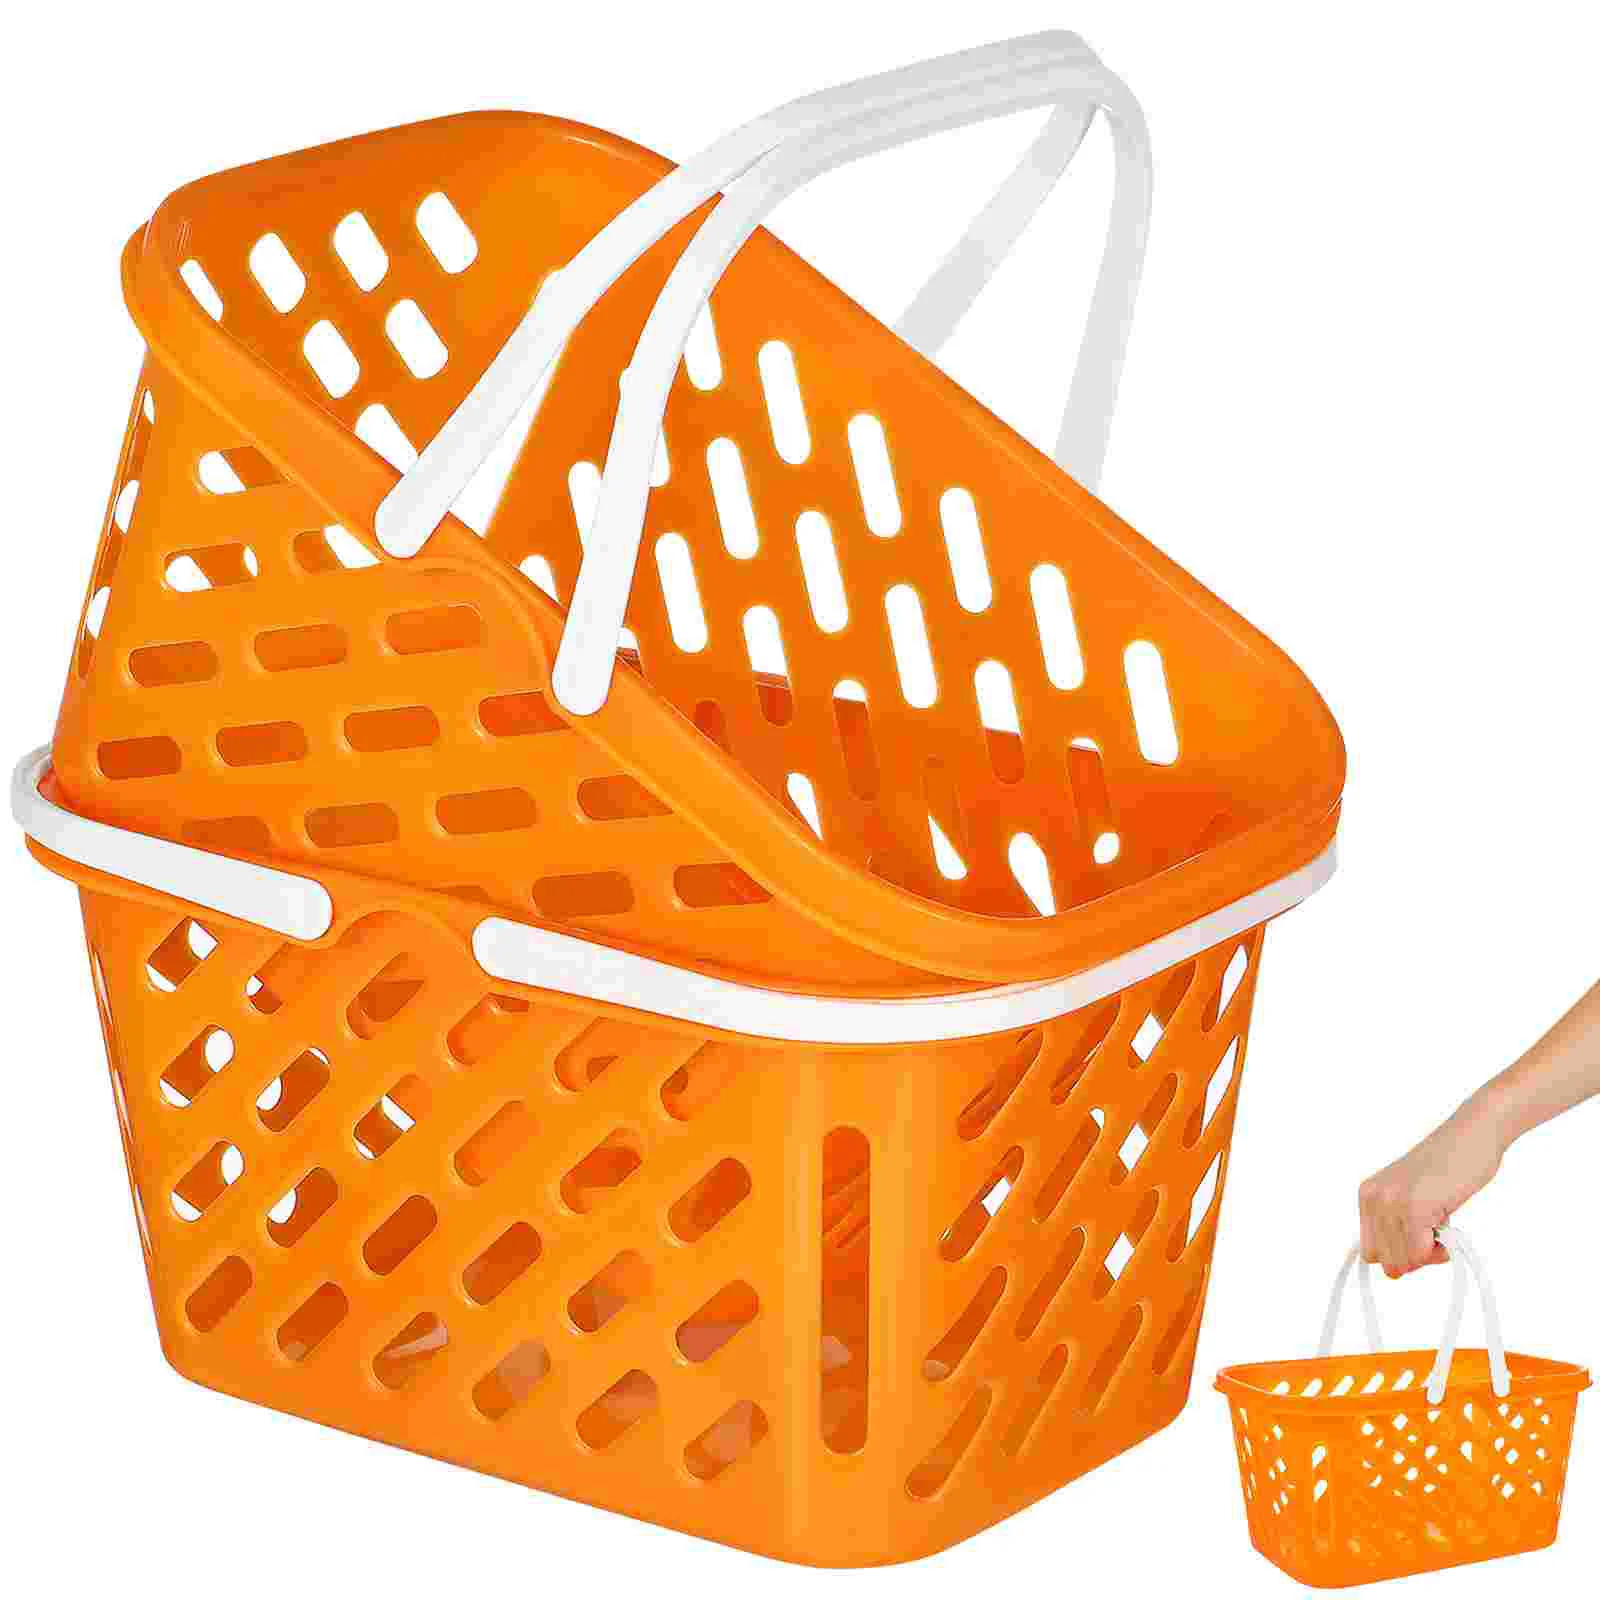 

2 Pcs Shopping Basket Savings Groceries Storage Portable Grocery Abs Raw Material Toy Baskets Child Bathroom